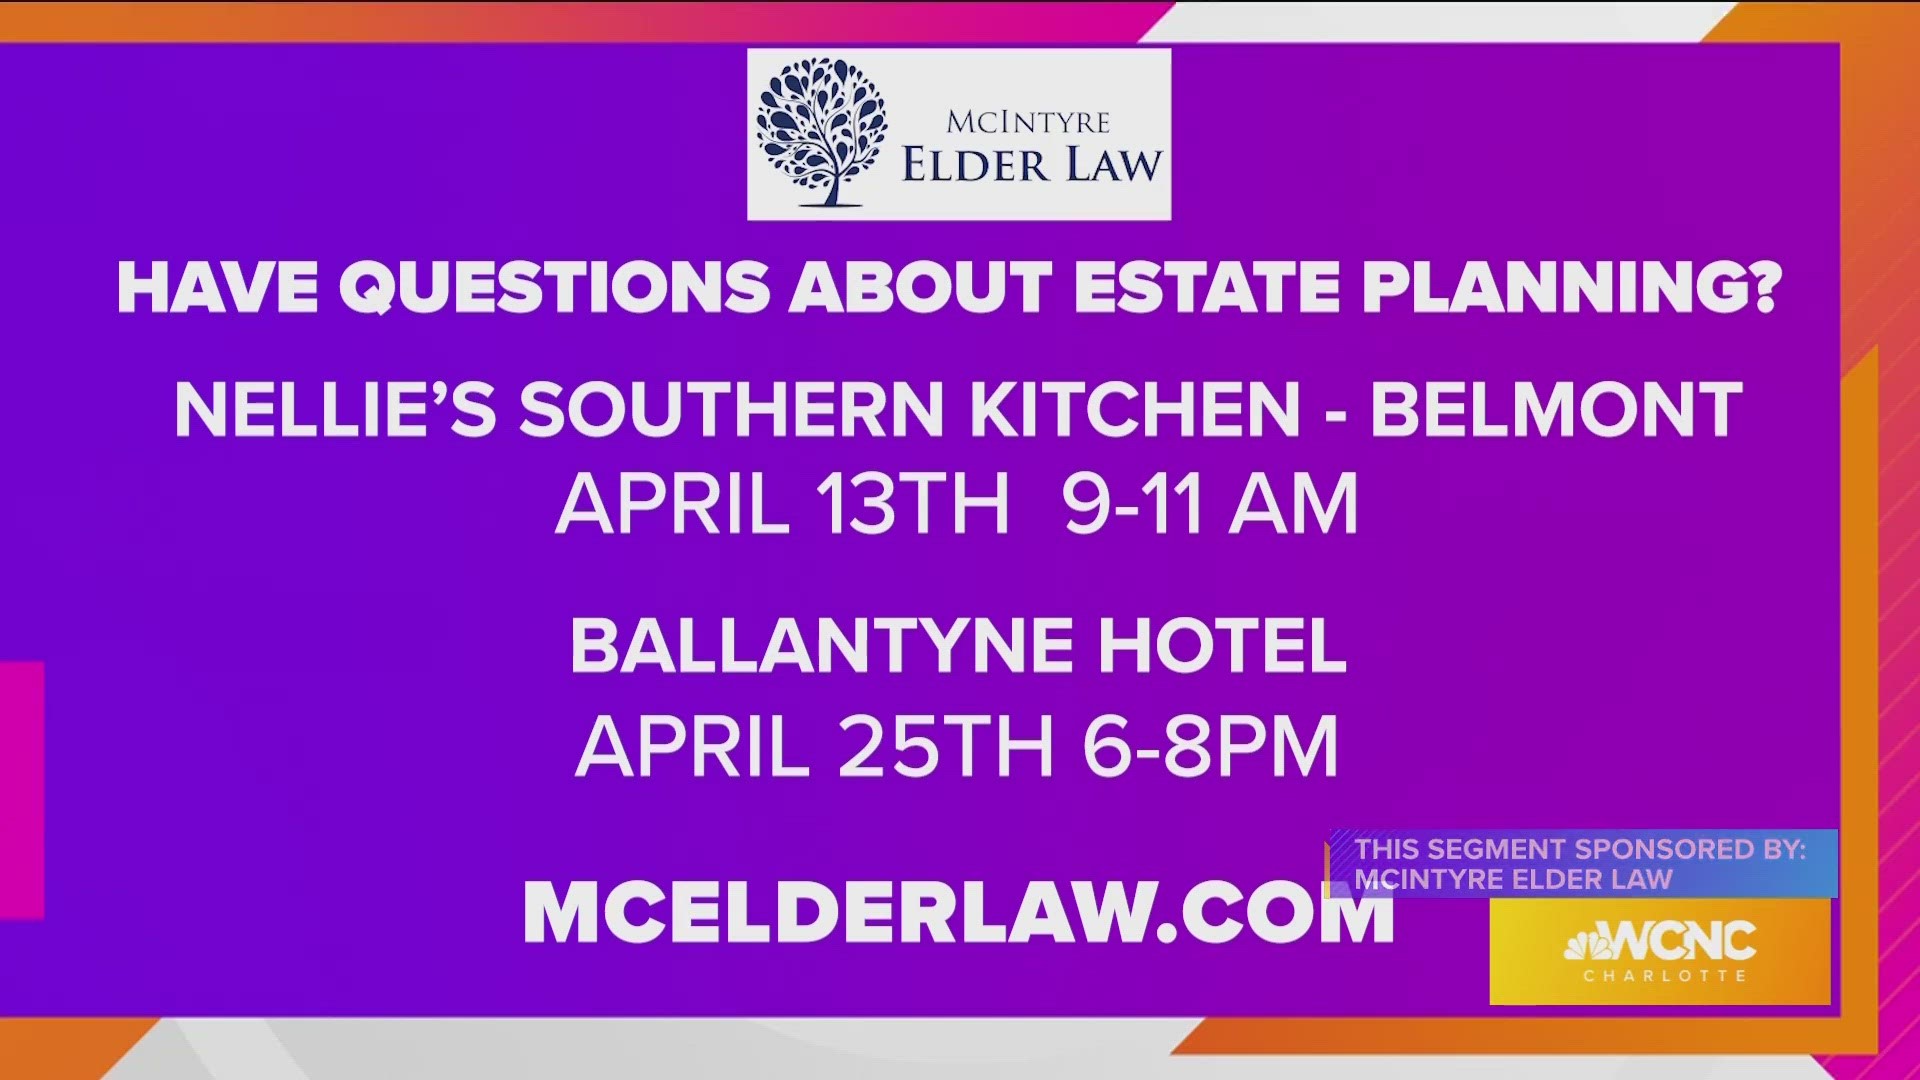 They have multiple events coming up you can attend and learn about estate planning